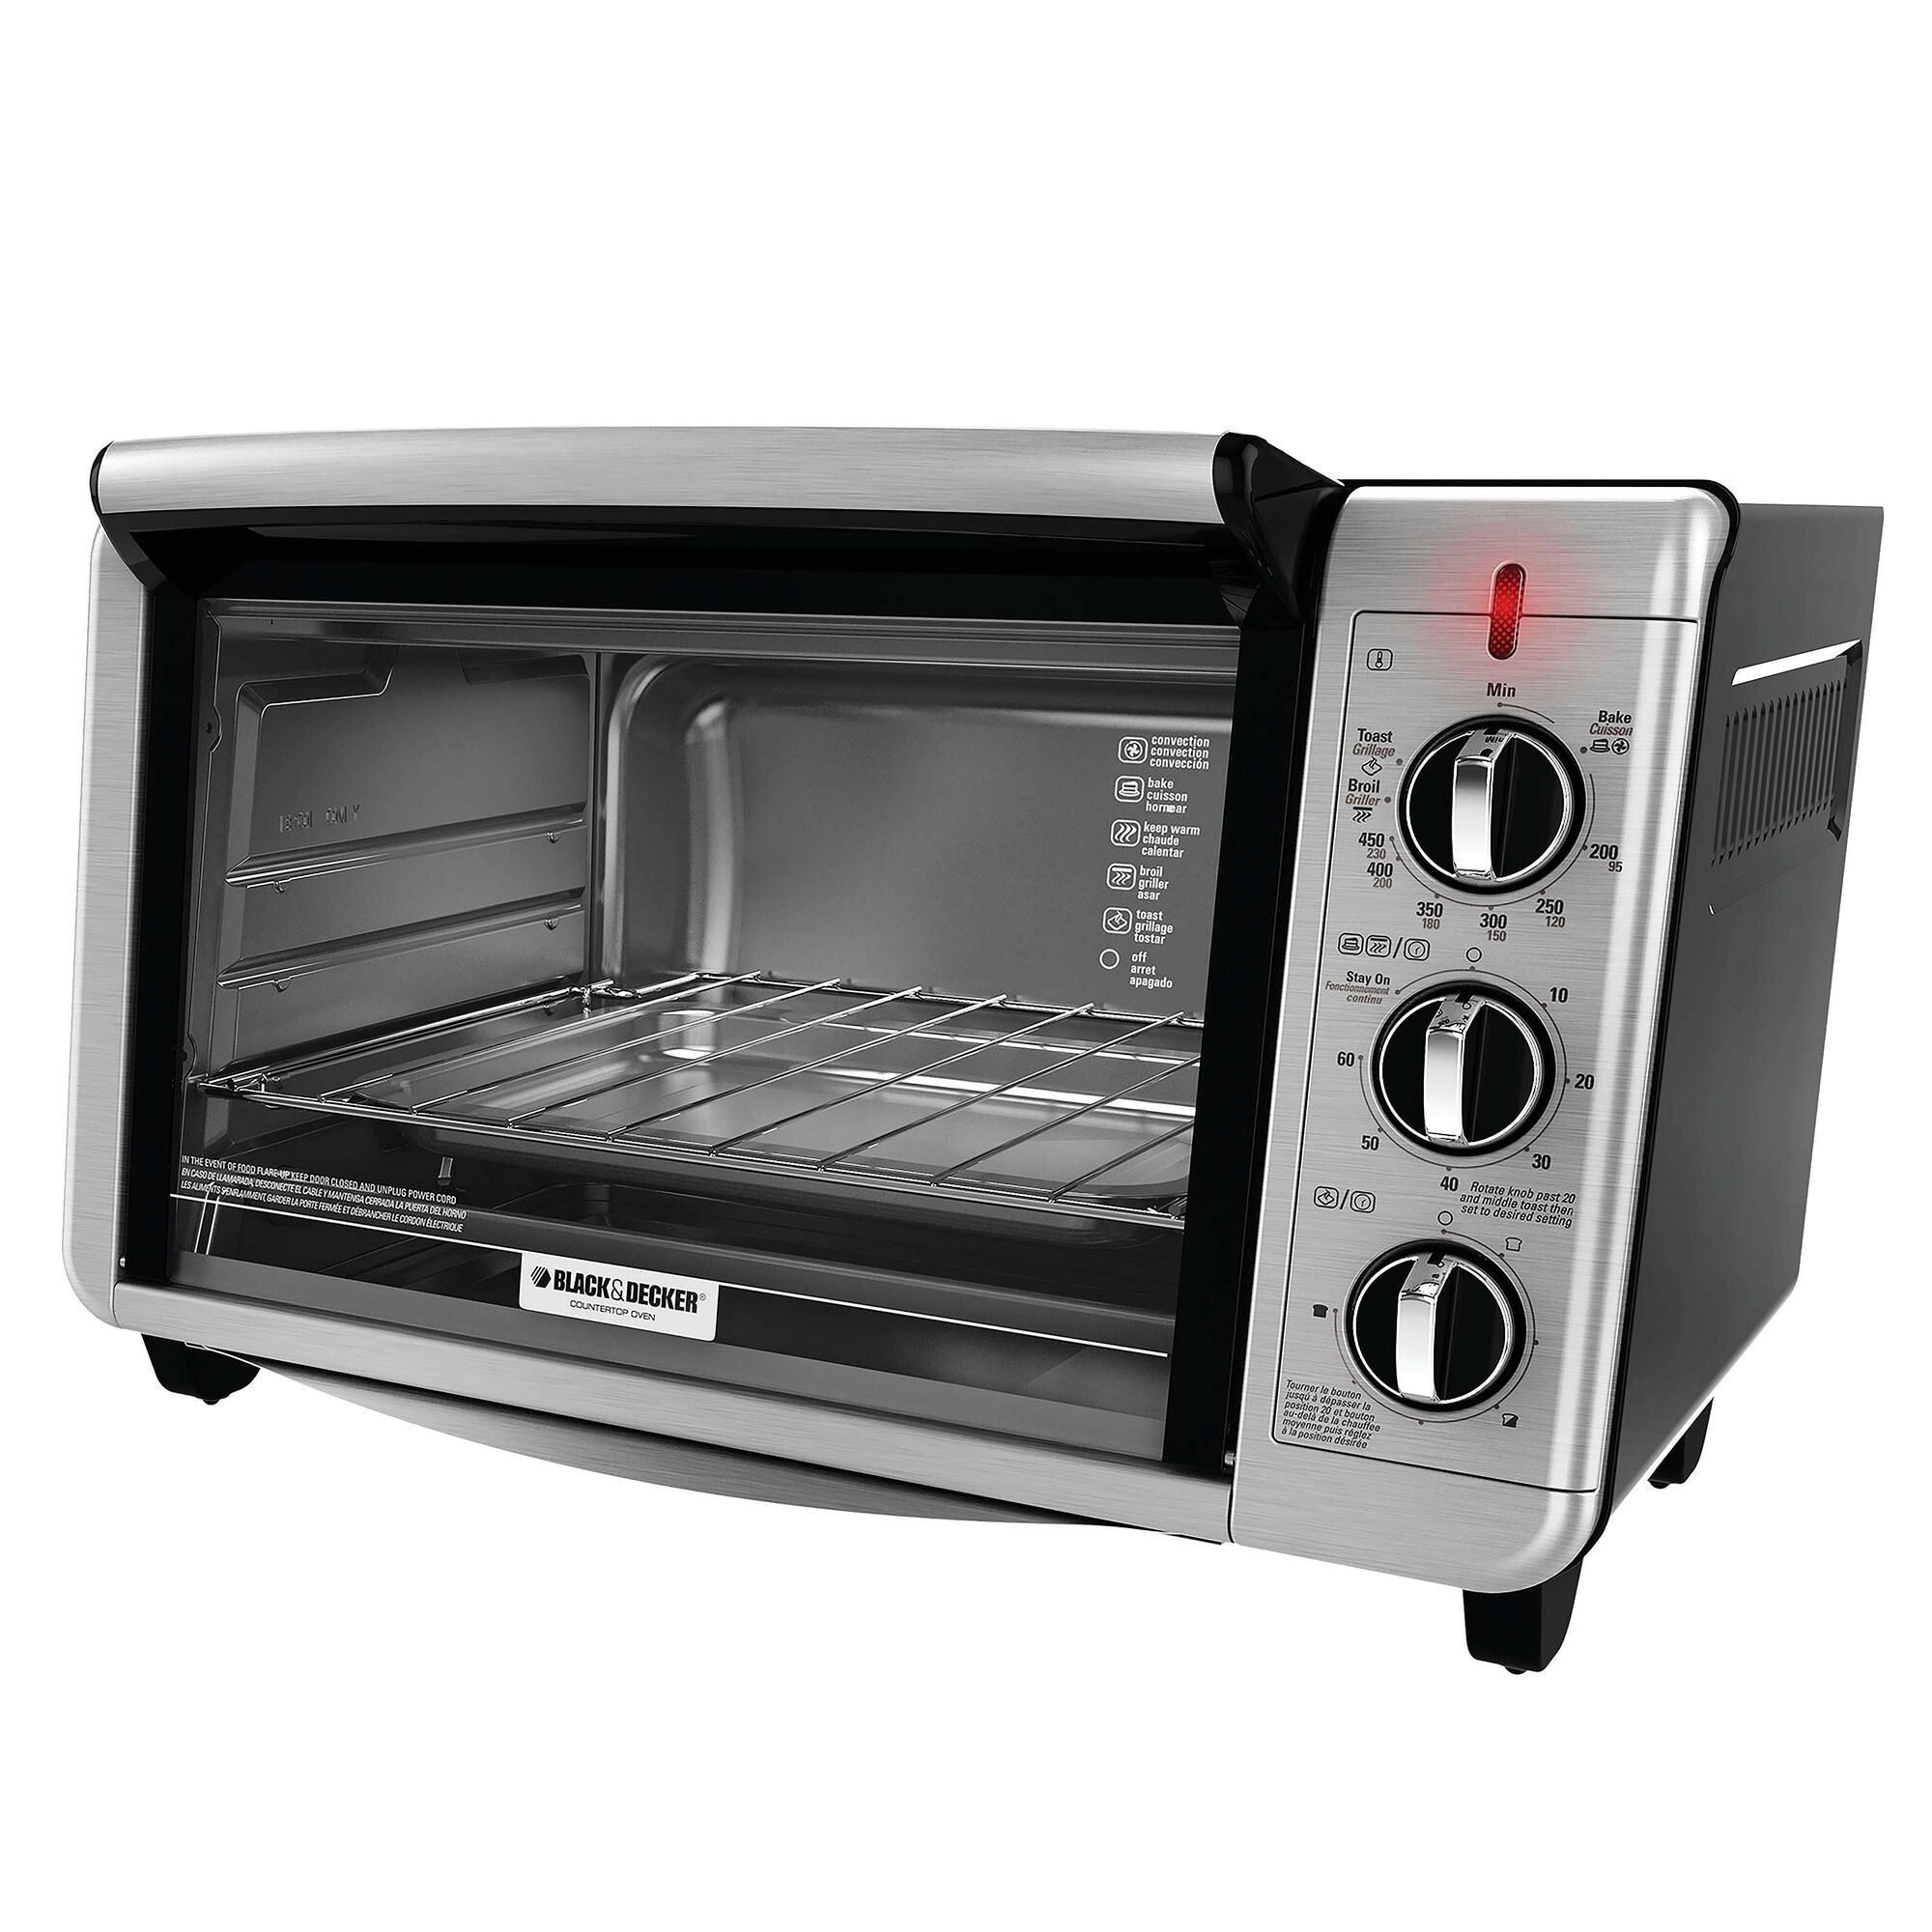 6 Slice Convection Countertop Toaster Oven.